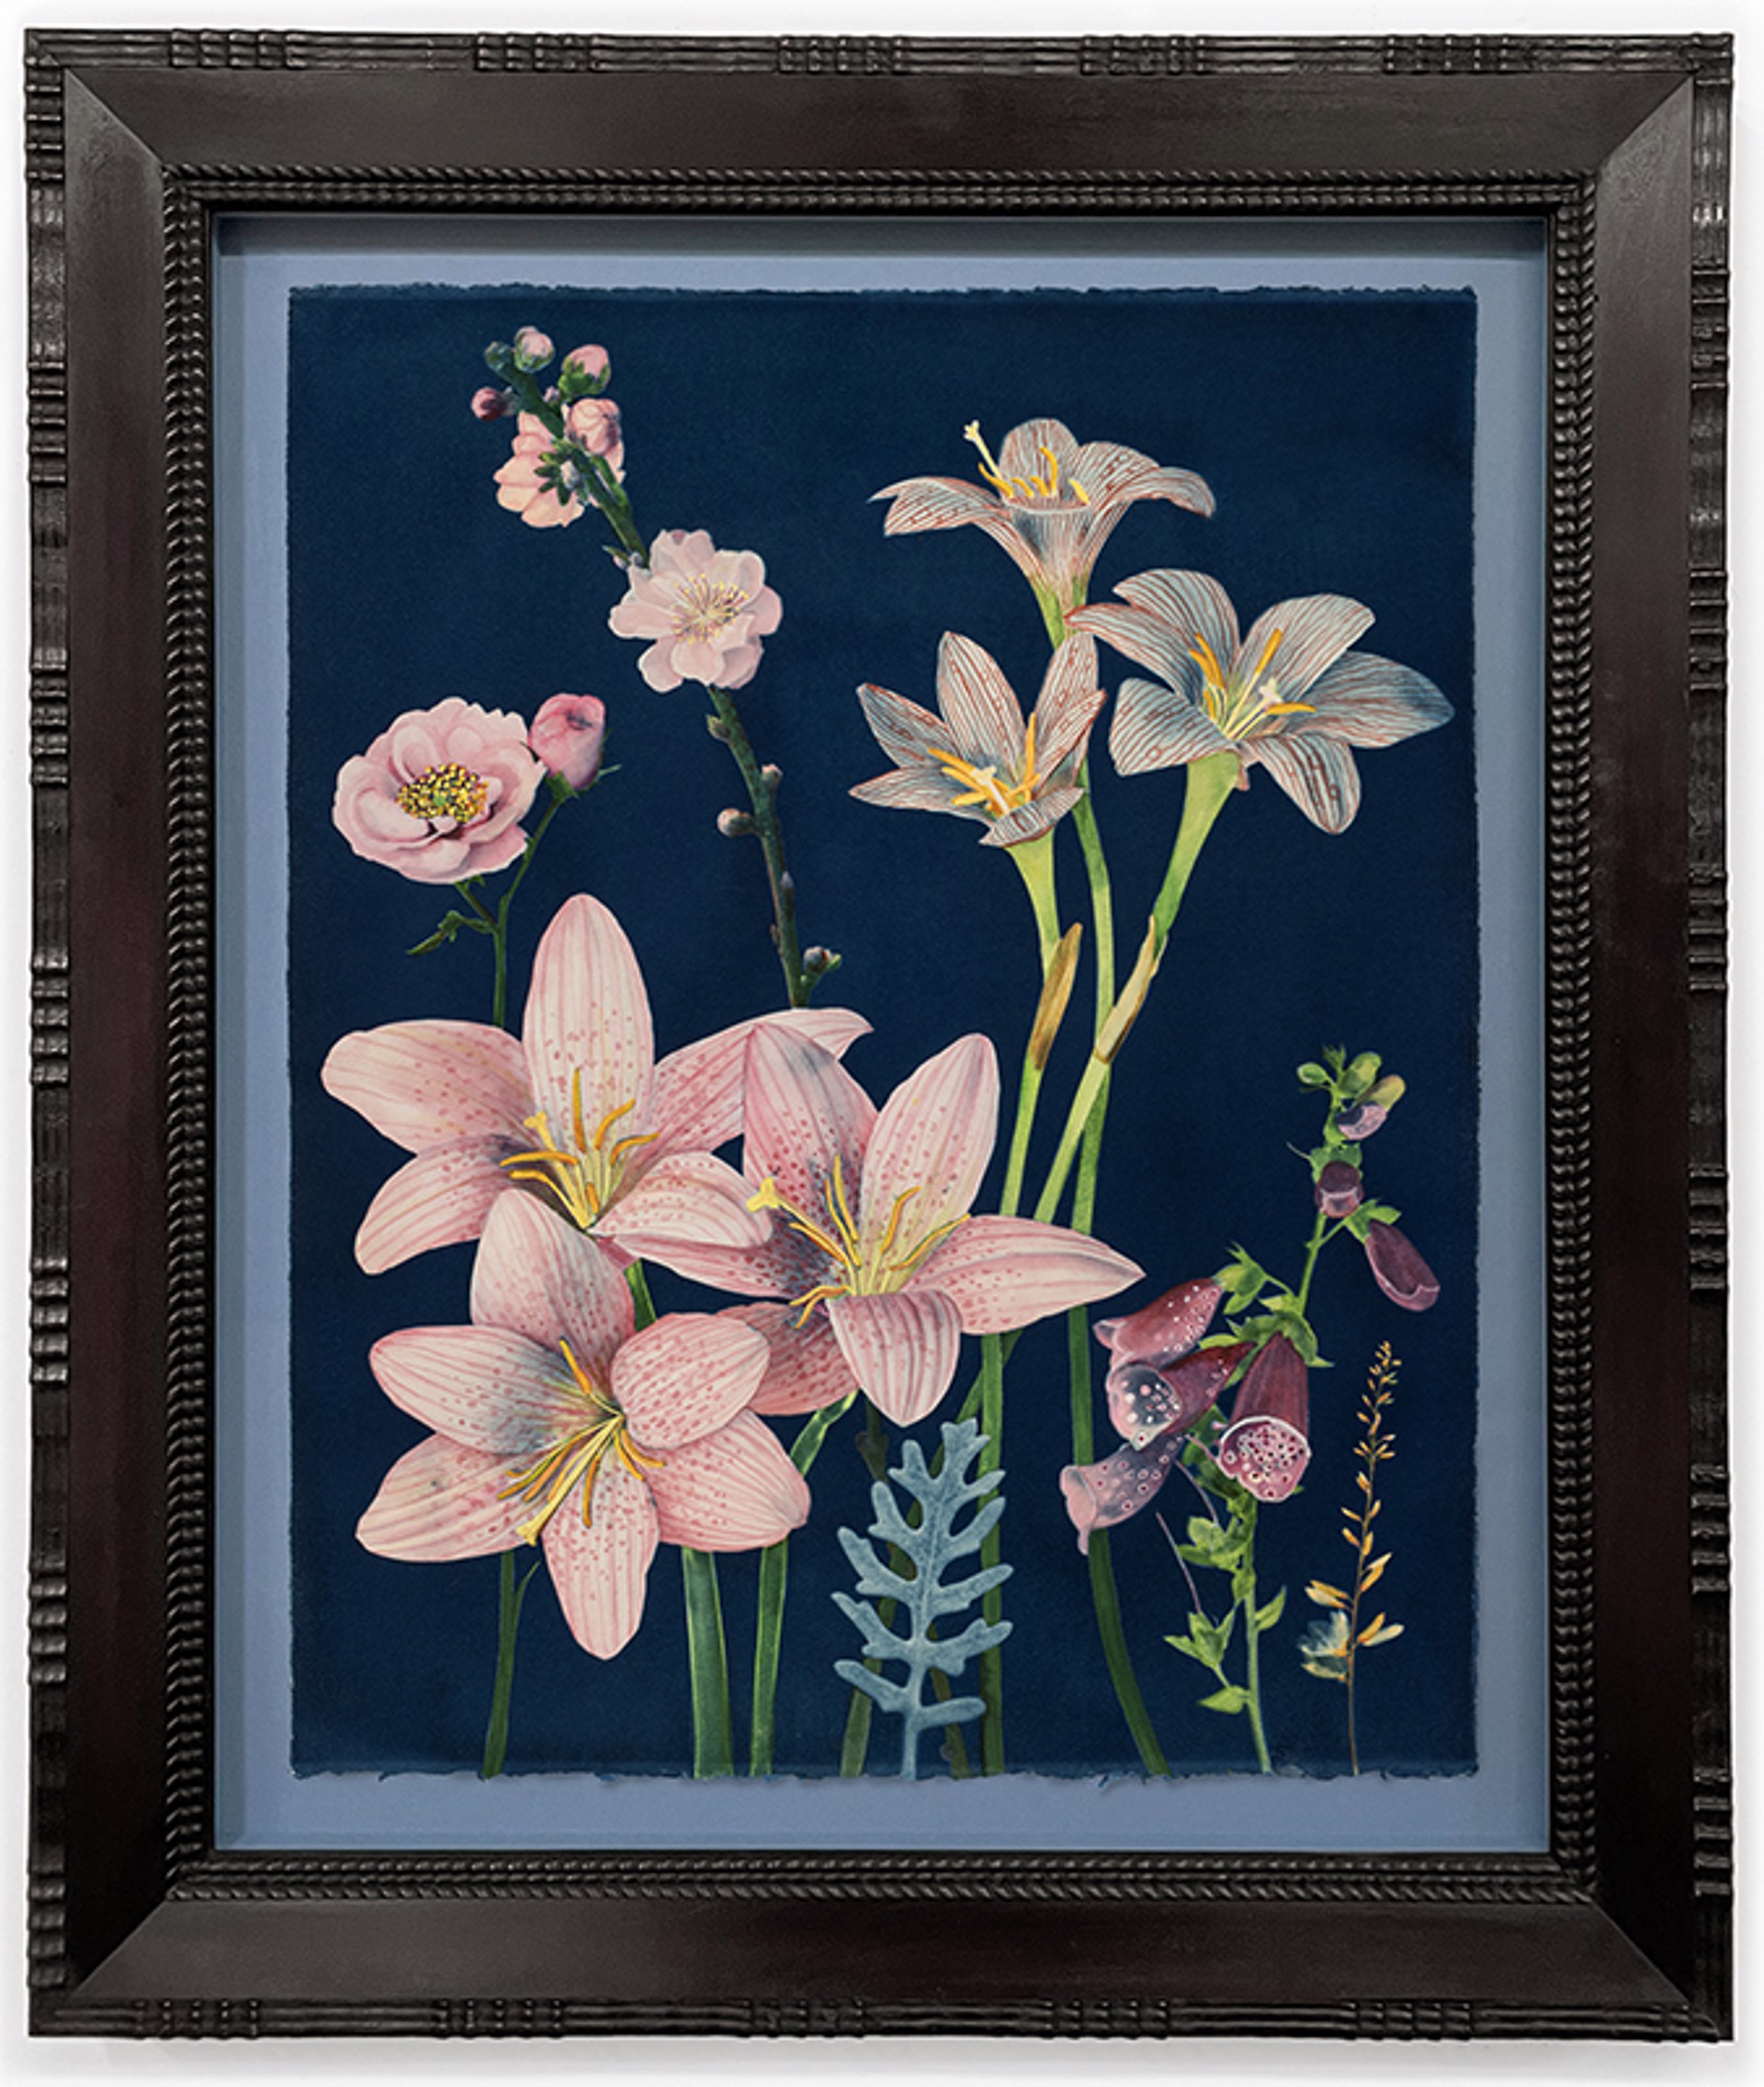 Picturesque Botany (Lily, Rose, Cherry Blossom, Foxglove, Dusty Miller, etc.) by Julia Whitney Barnes